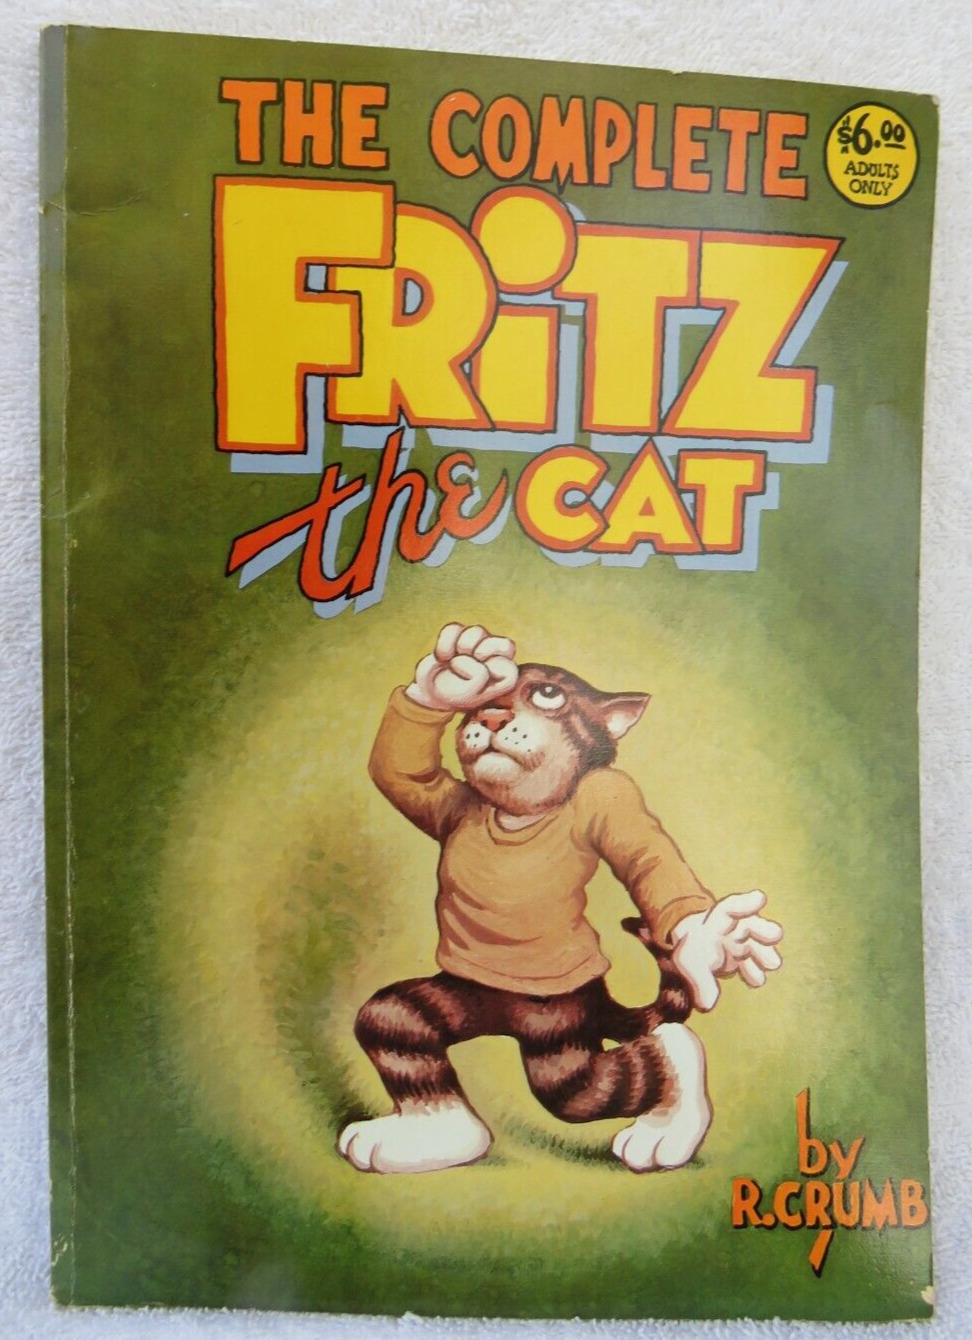  THE COMPLETE FRITZ THE CAT BY R.  CRUMB BOOK - 1978 -  